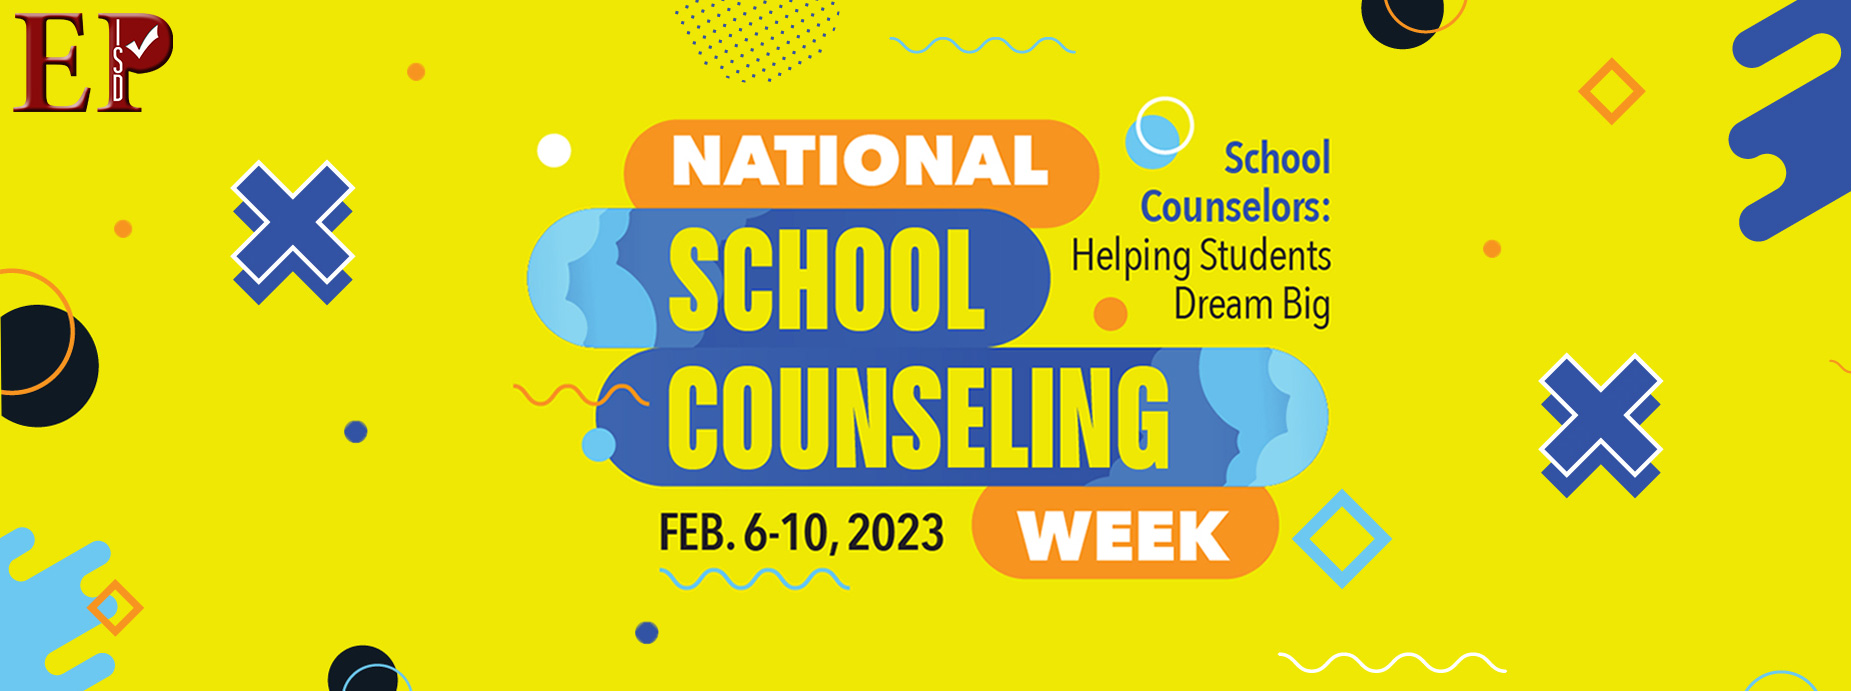 National School Counseling Week banner